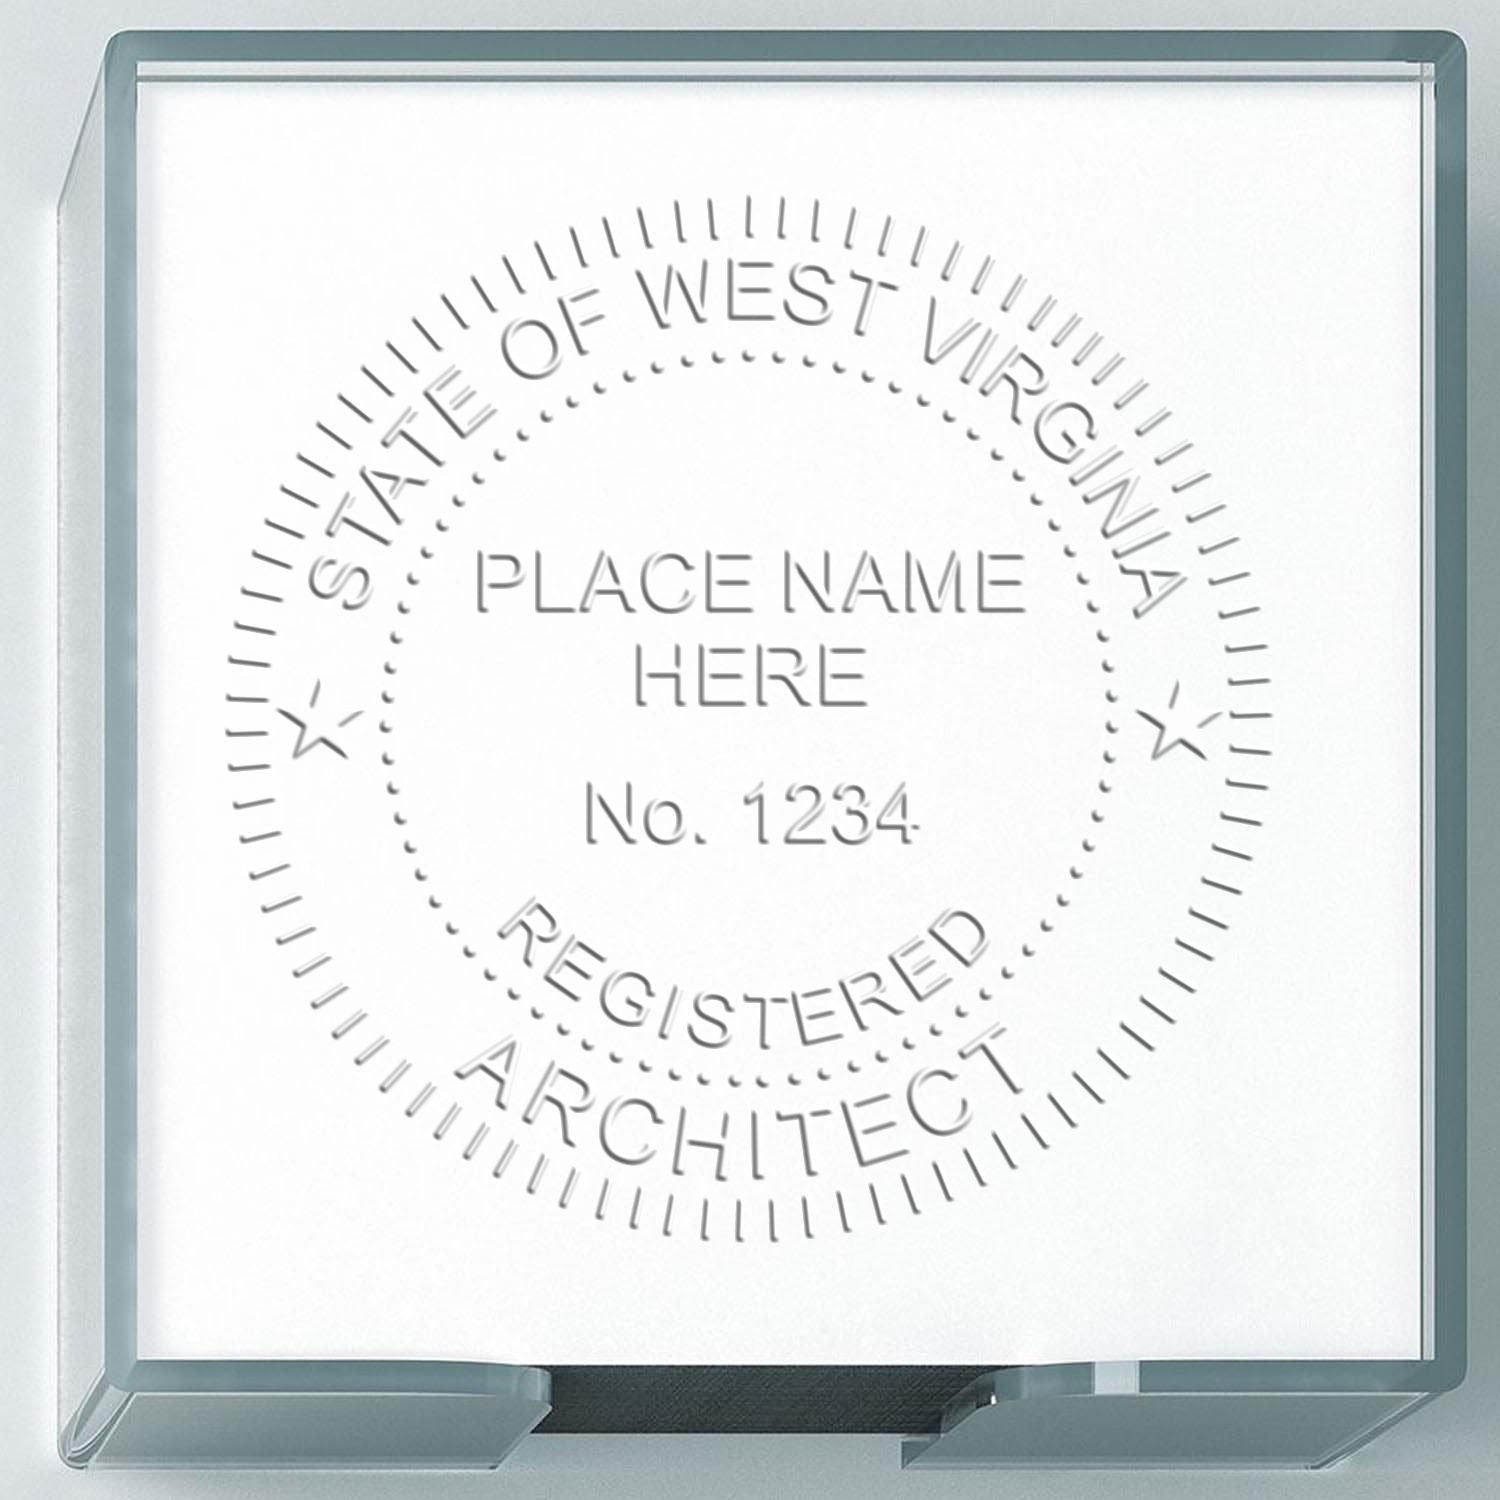 A stamped imprint of the Gift West Virginia Architect Seal in this stylish lifestyle photo, setting the tone for a unique and personalized product.